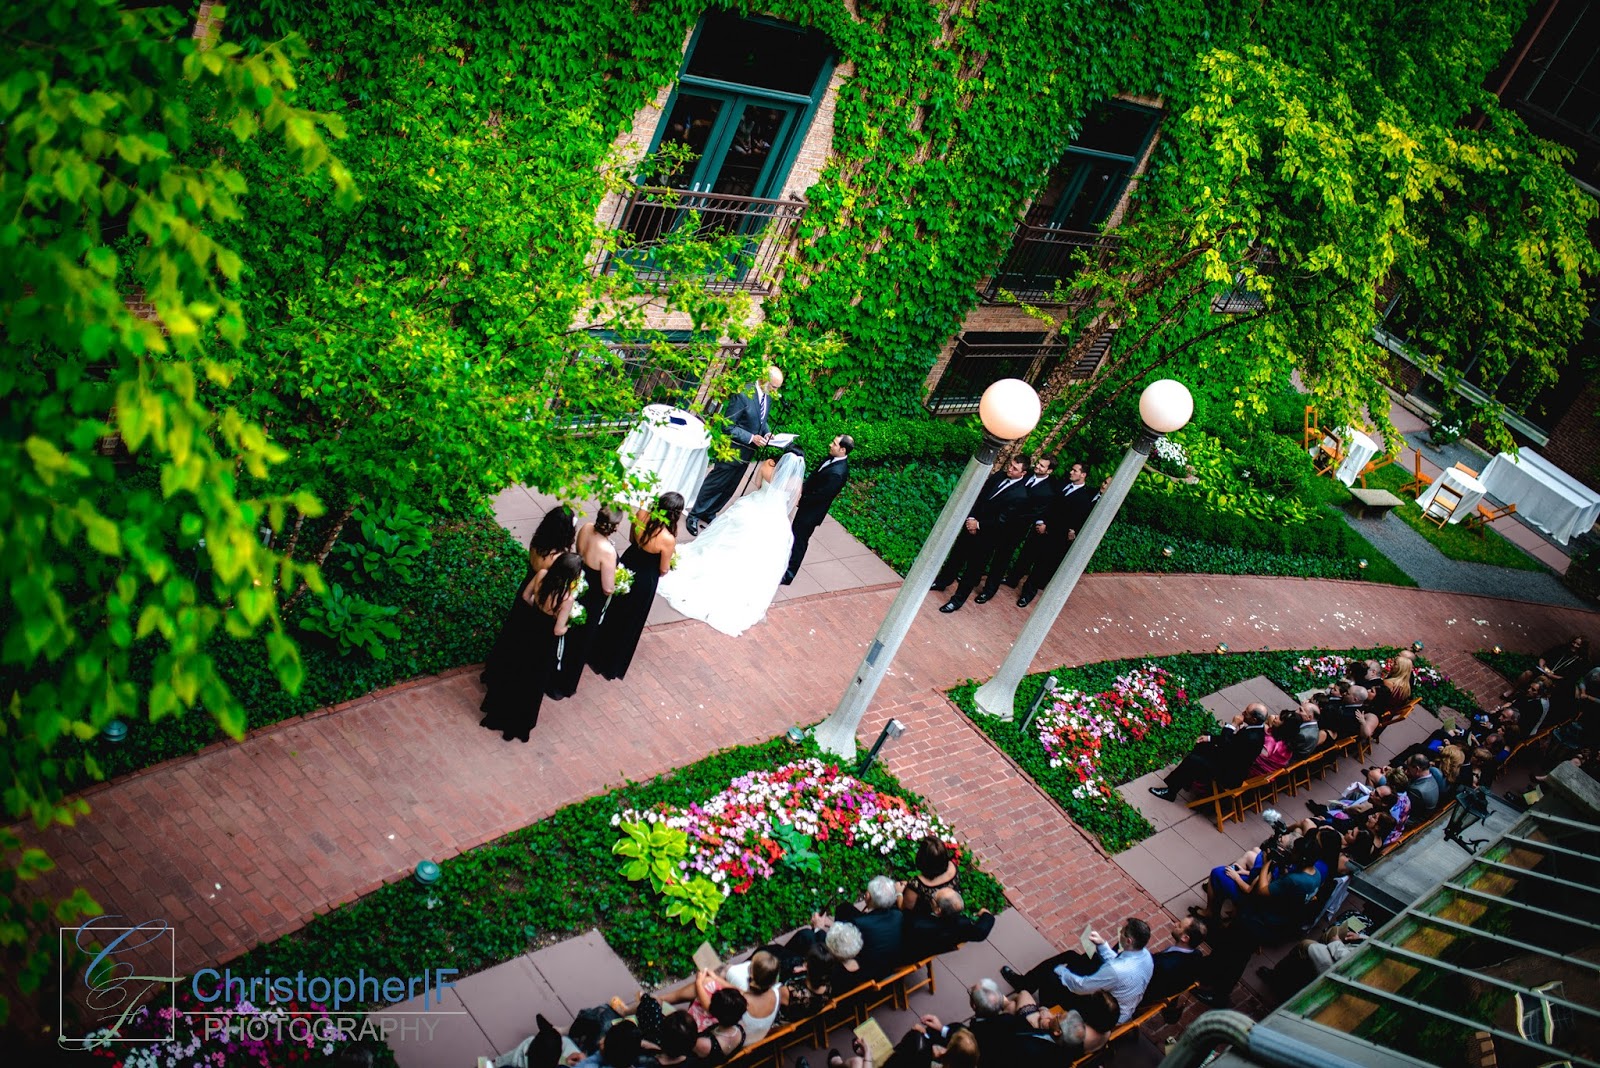 Chicago Wedding at the Ivy Room Photo